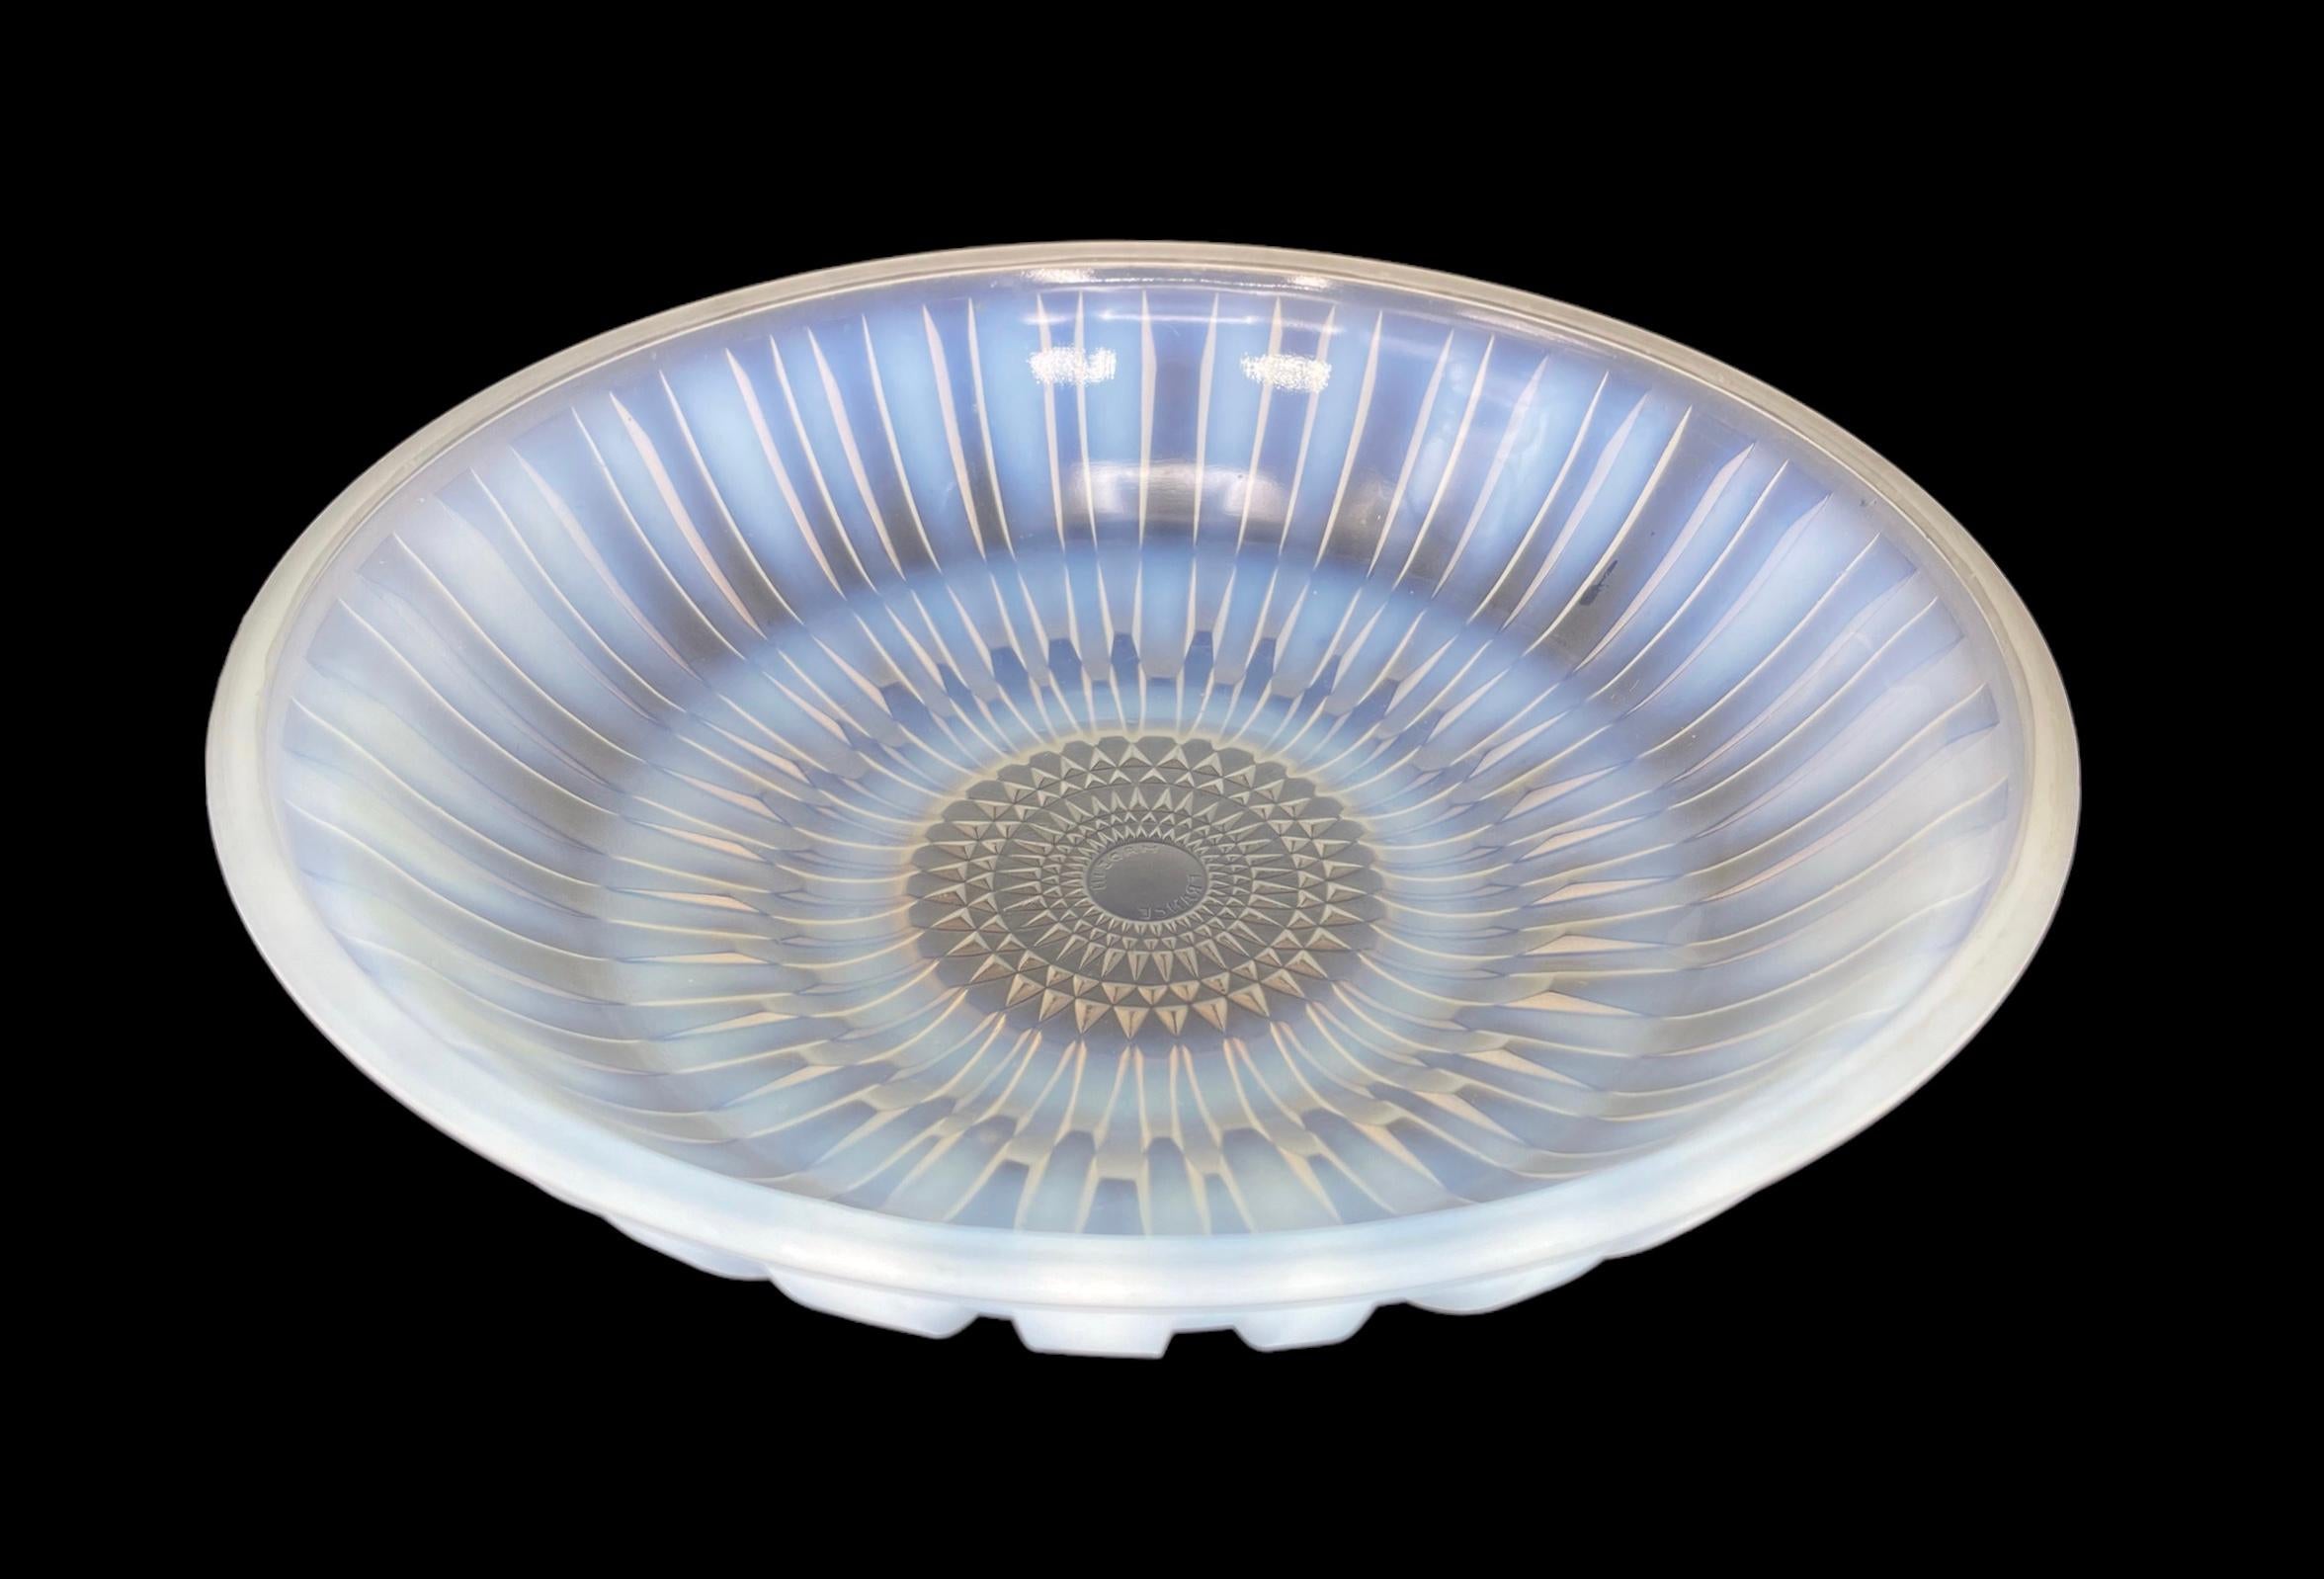 French Art Deco opalescent ‘chrysanthemum’ pattern, glass bowl by Andre Hunebelle (1896-1985)
The ‘crysanthemum’ bowl featured in the Hunebelle catalogue, and this example simply marked ‘MADE IN FRANCE’.
Initially Andre studied mathematics before he